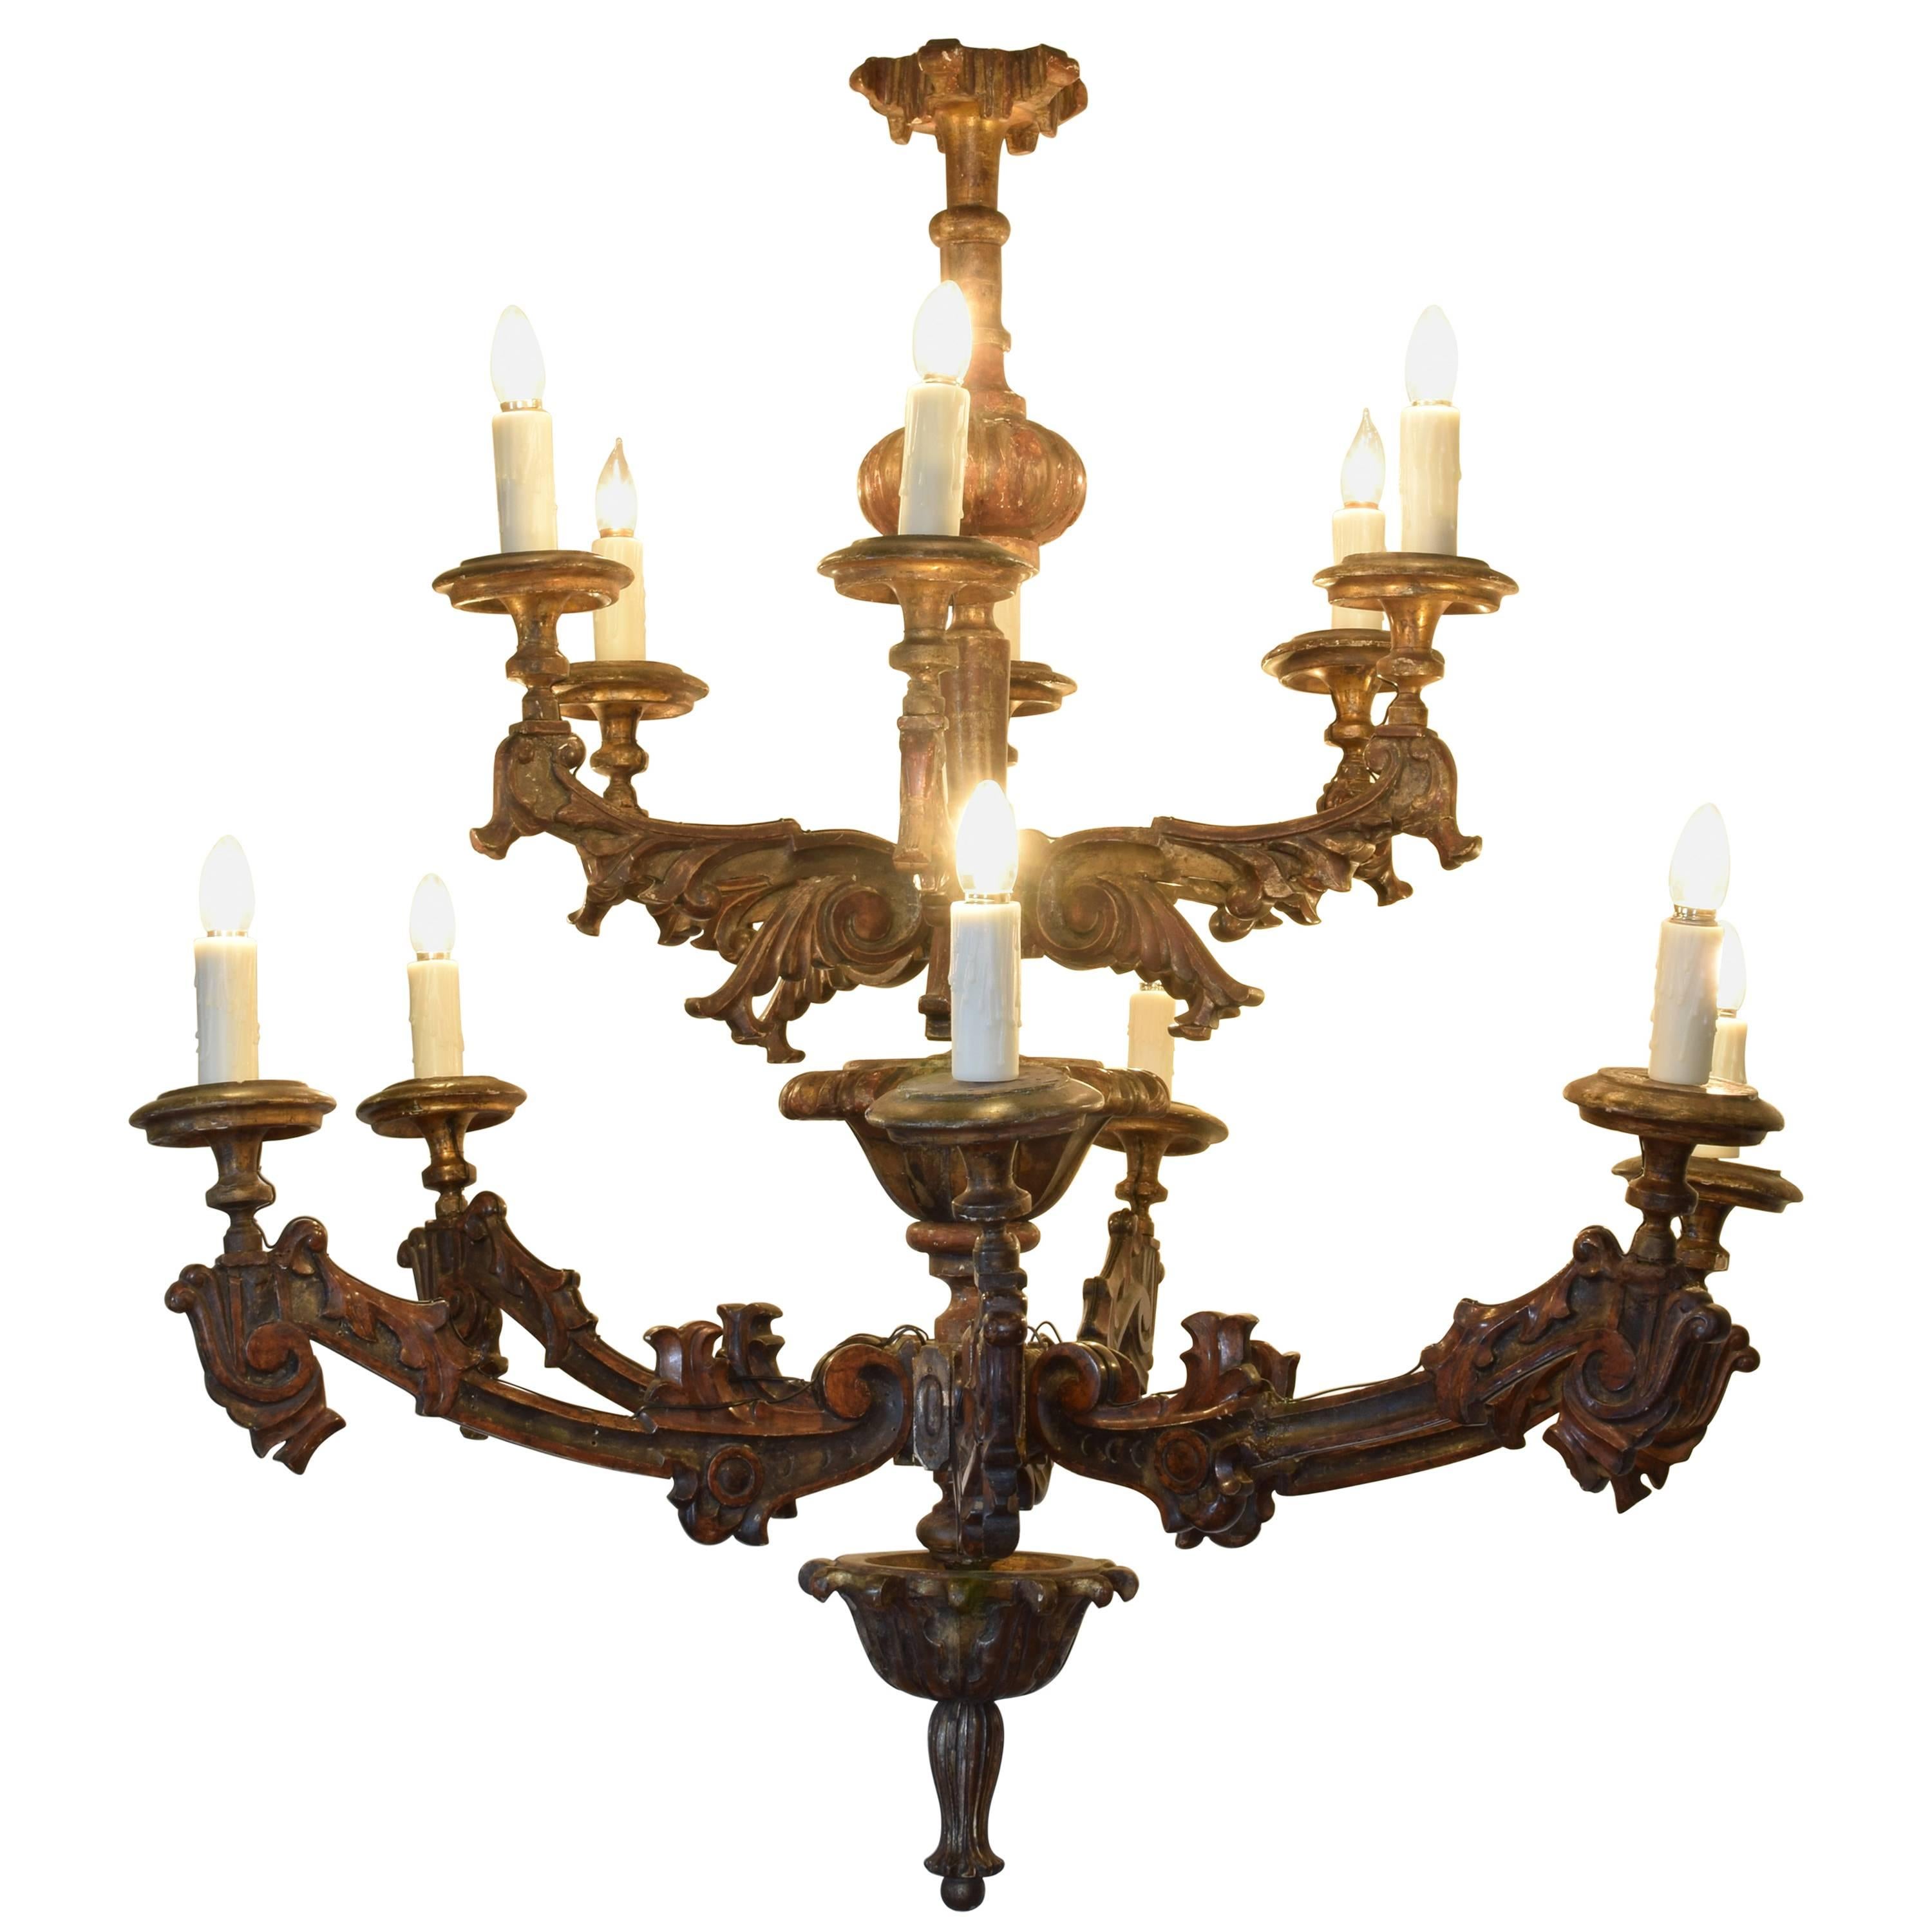 Italian Carved Giltwood Twelve-Arm Chandelier, First Half of the 19th Century